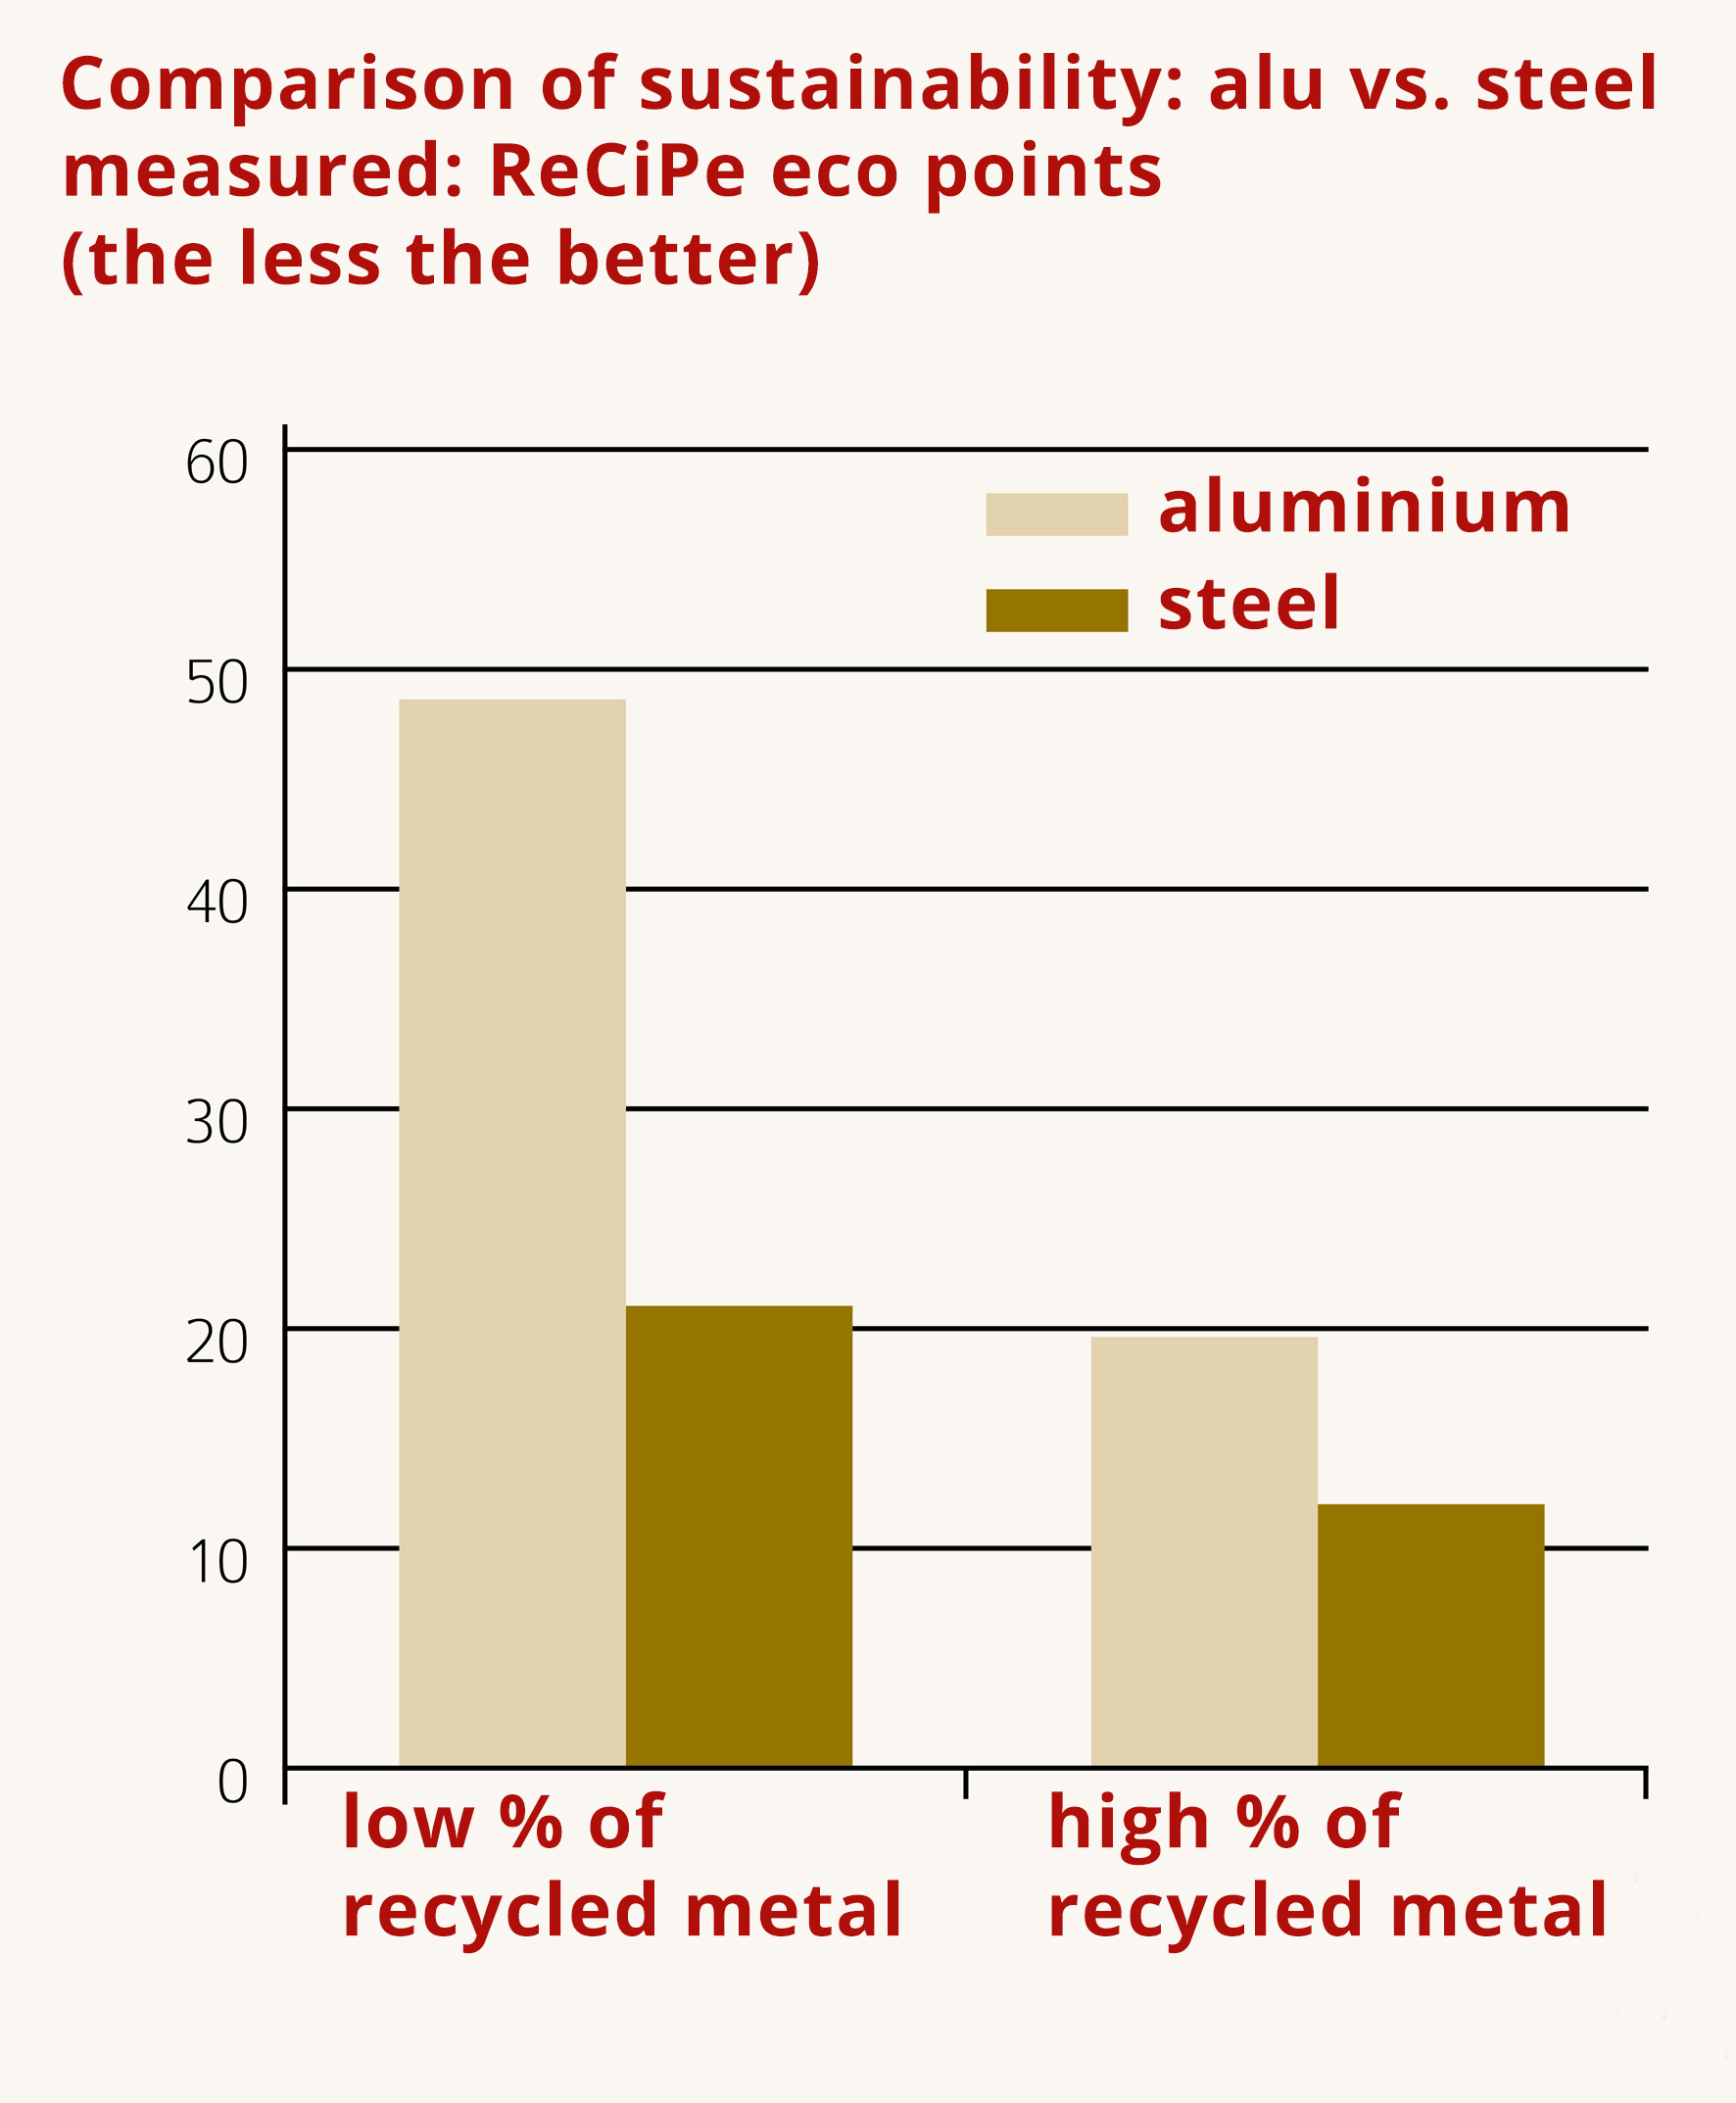 Ecopoints of aluminium and steel - the lower the better